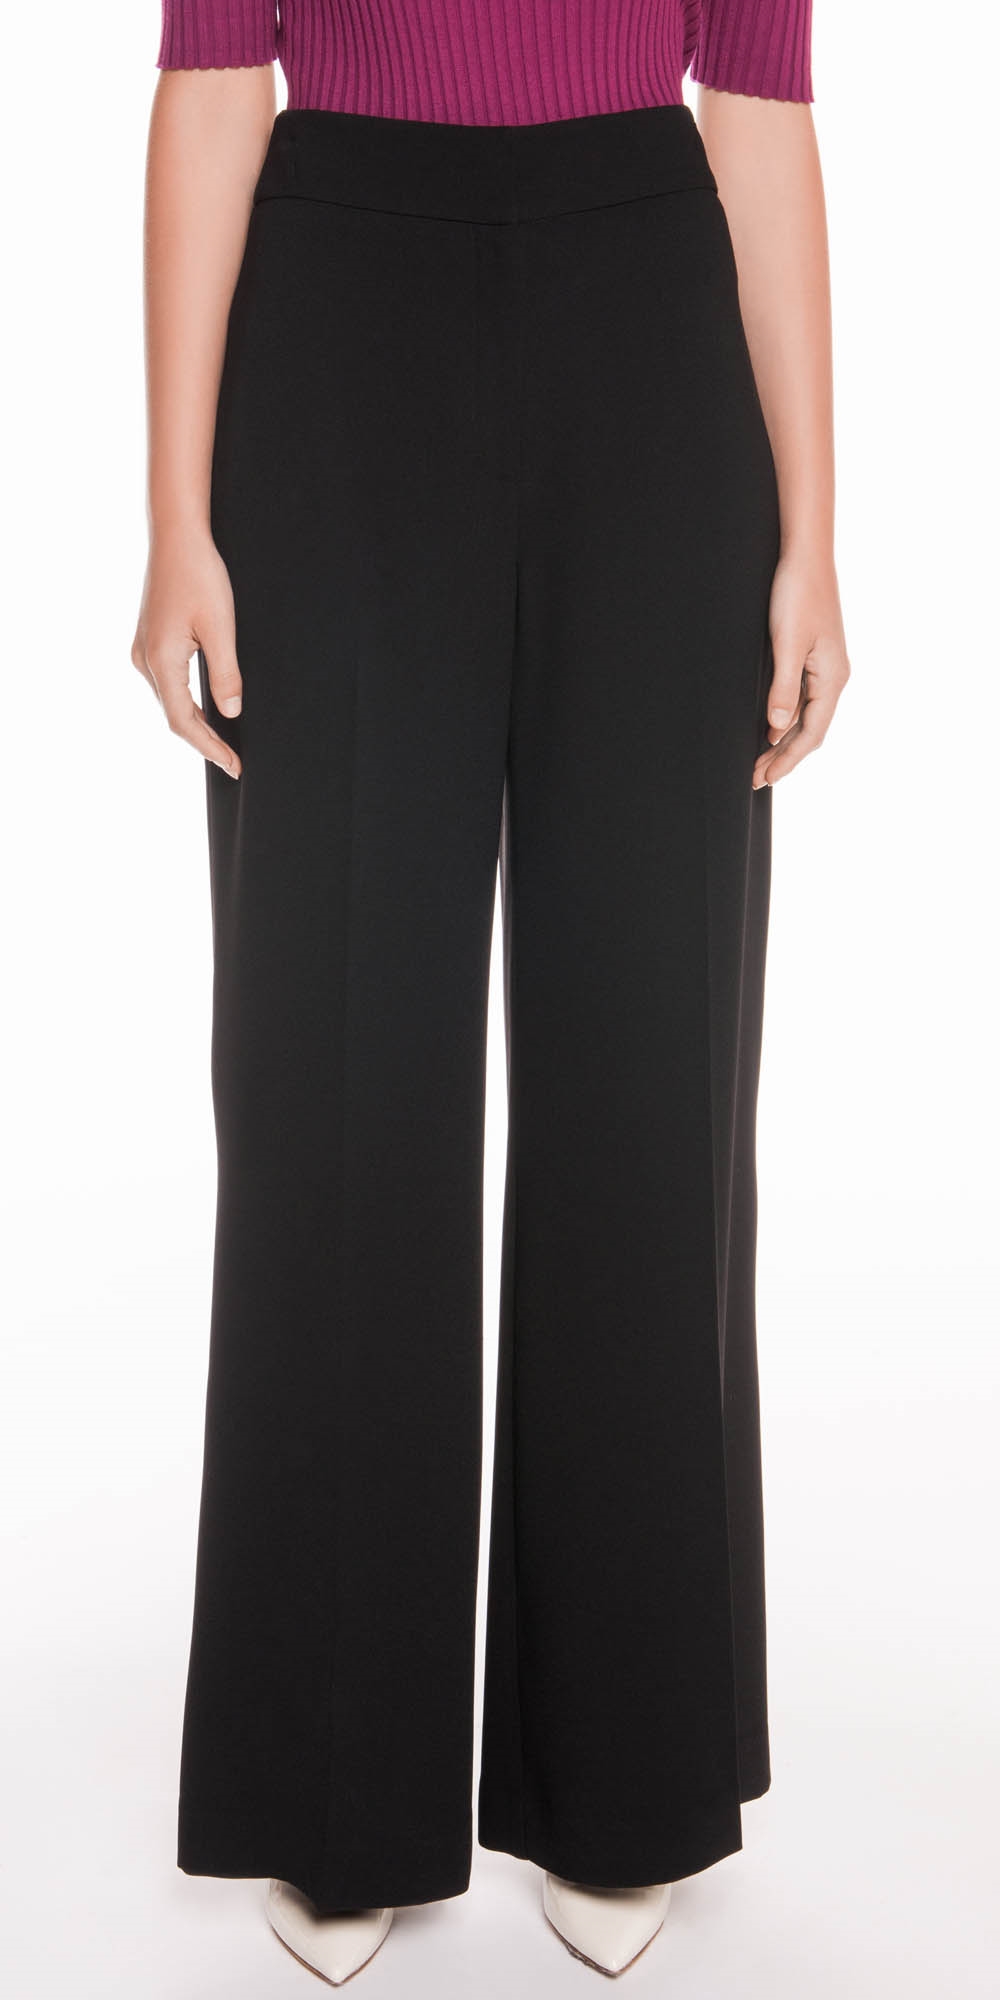 Satin Back Crepe High Waisted Pant | Buy Pants Online - Cue